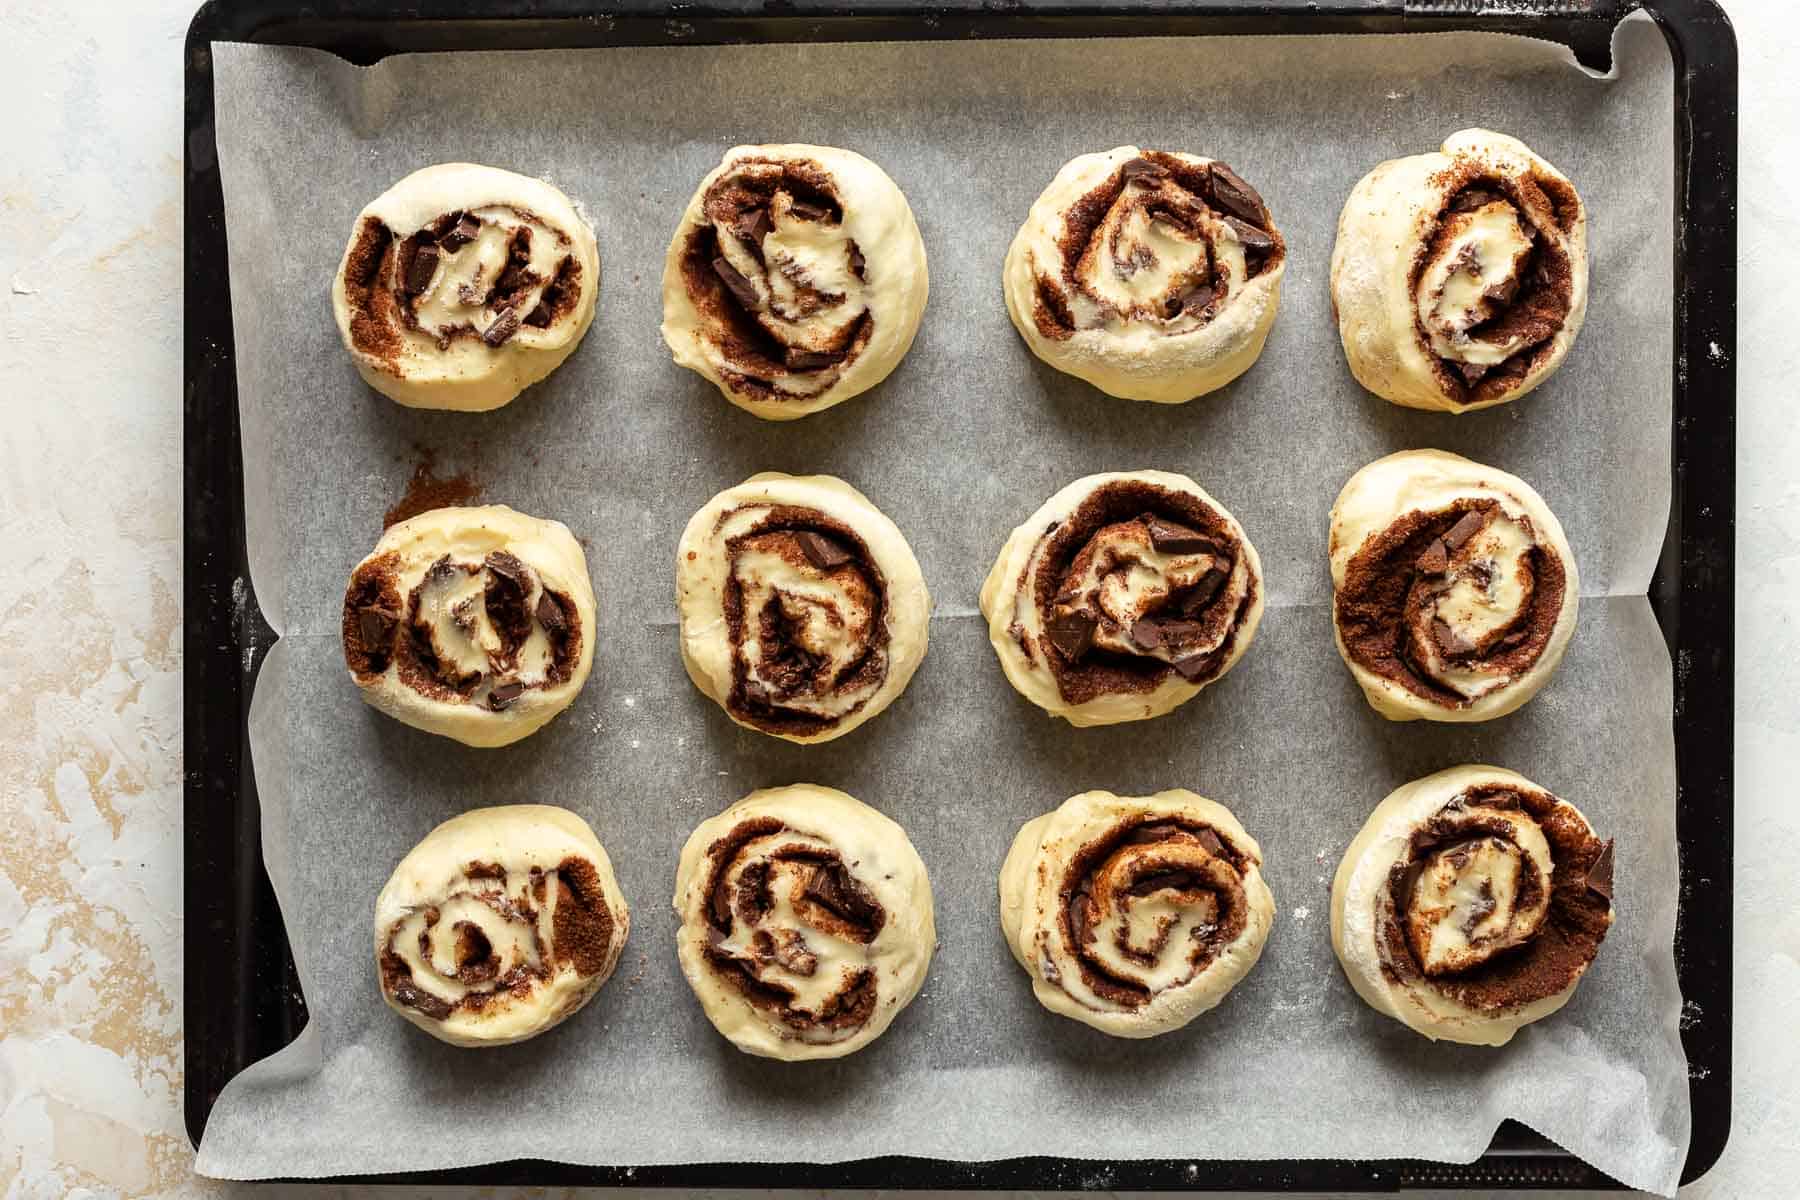 unbaked rolls sitting on a baking pan